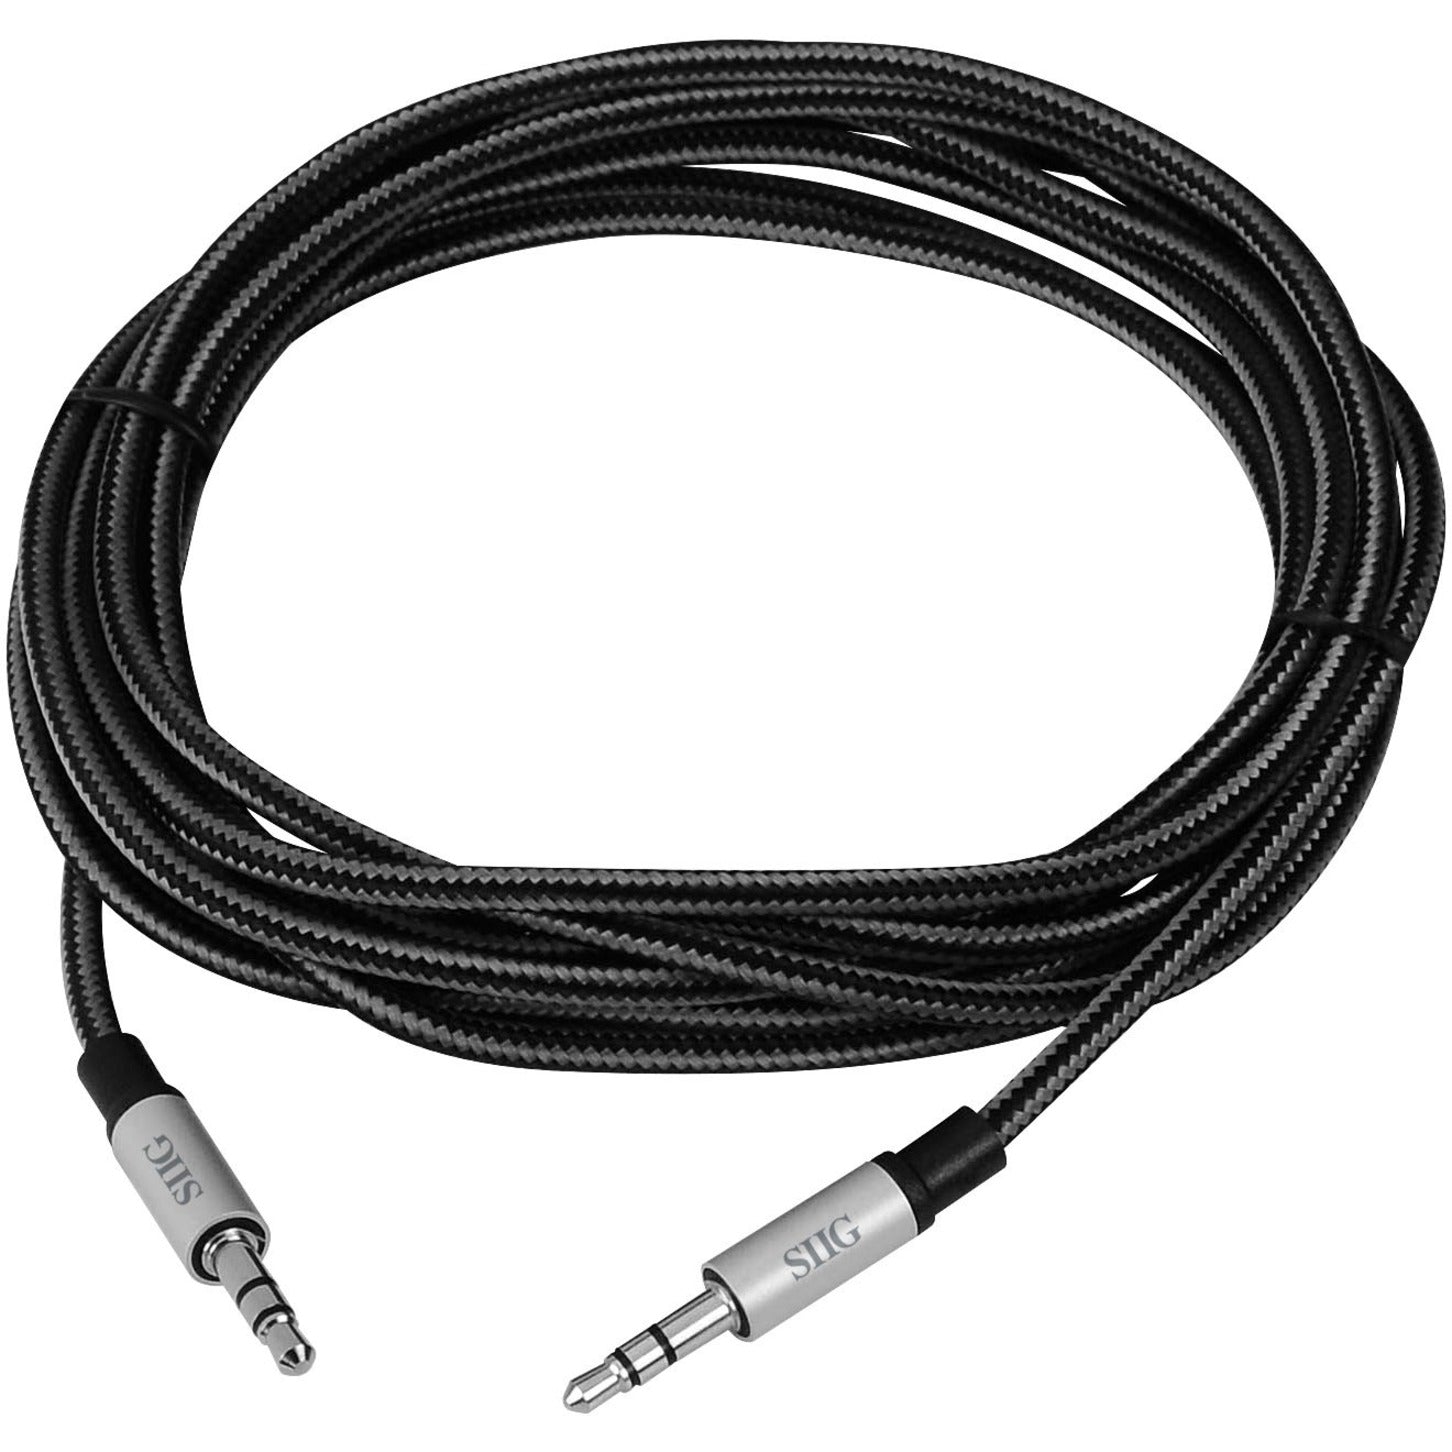 SIIG CB-AU0B12-S1 Woven Fabric Braided 3.5mm Stereo Aux Cable (M/M) - 3M, Tangle-Free, Loss-Less Audio, Durable